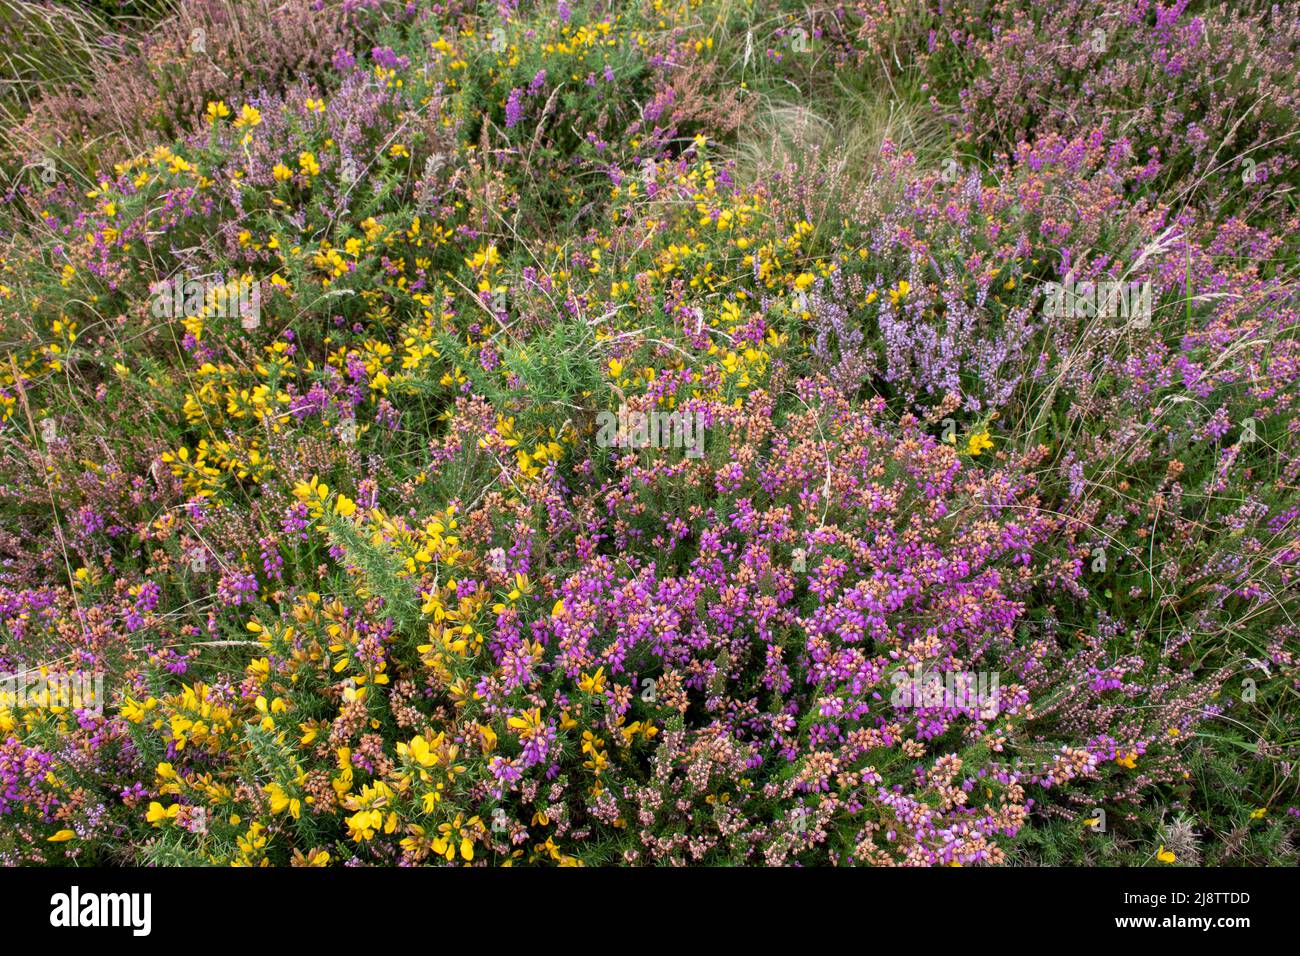 Heather and gorse in late Summer at Dunkery Hill Beacon, Exmoor National Park, Somerset,England Stock Photo